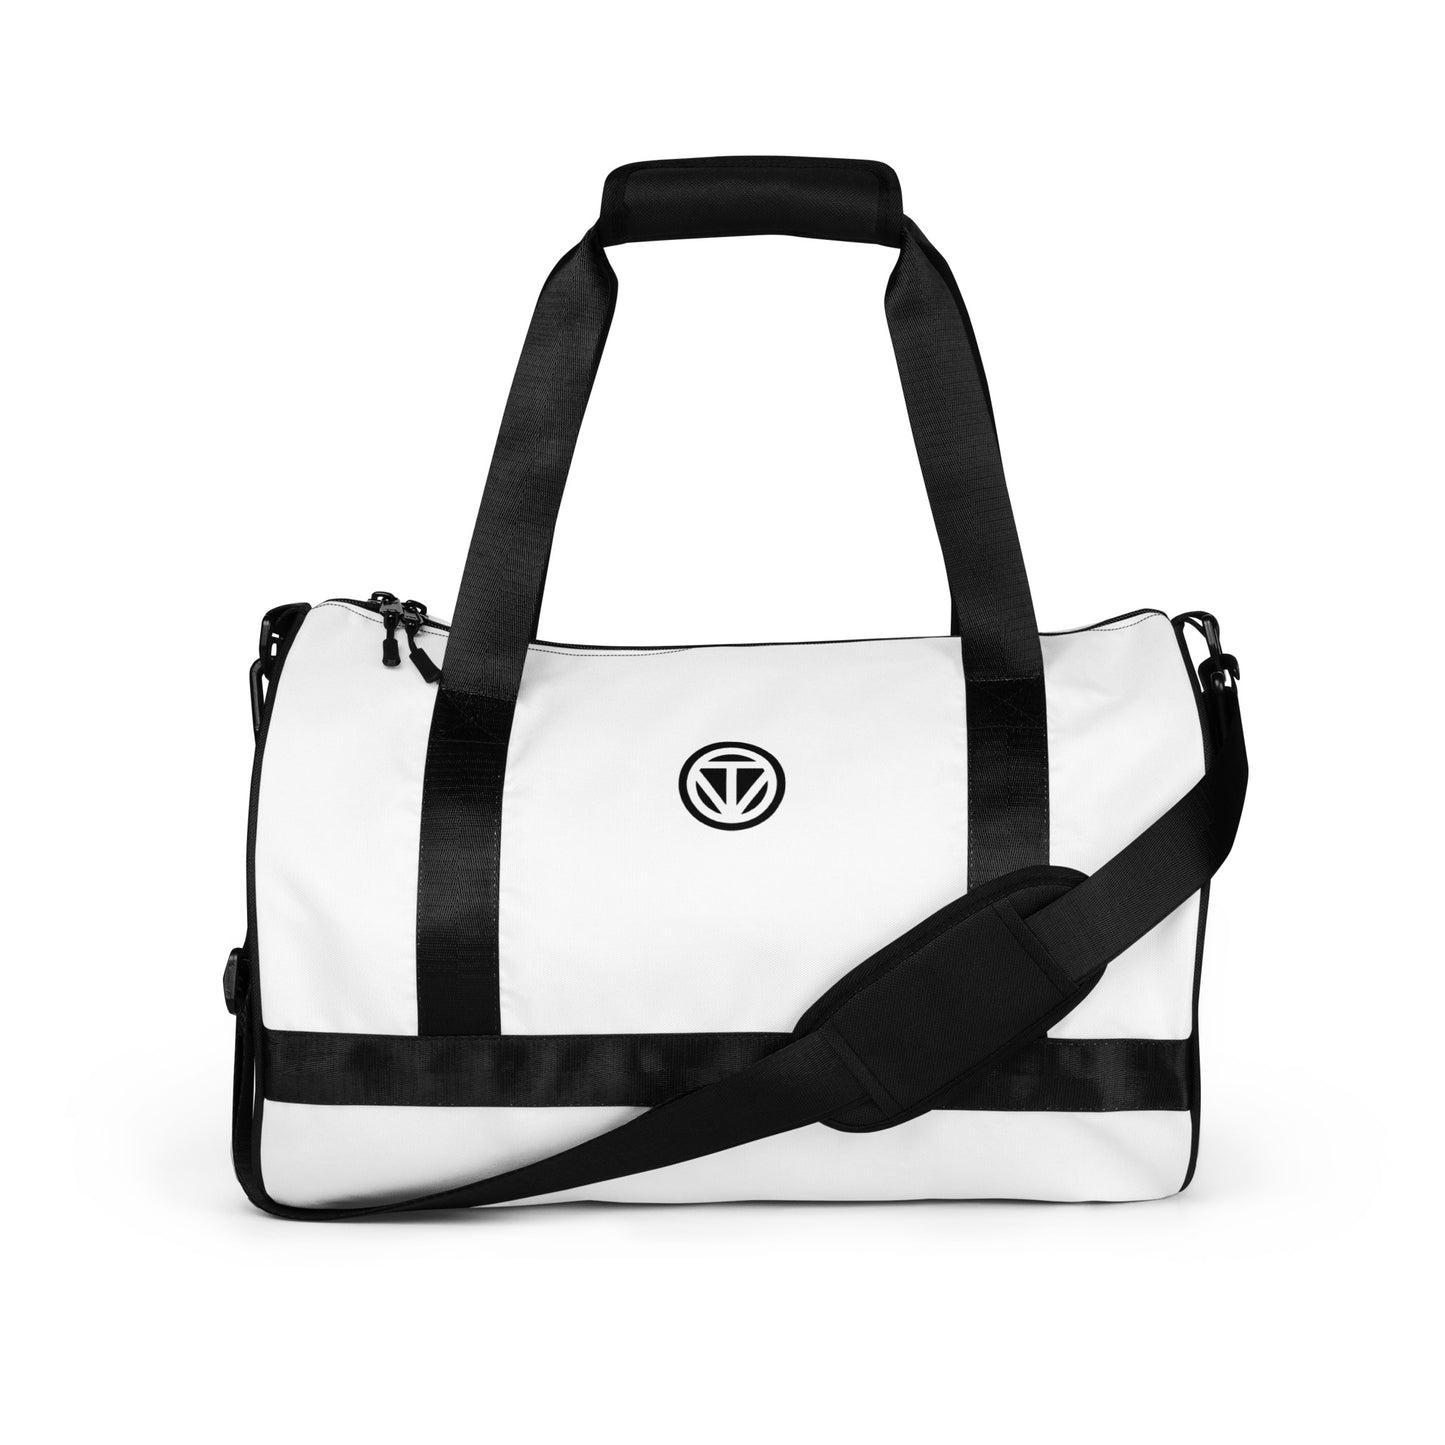 TIME OF VIBES - Sports Bag 23 (White) - €75.00